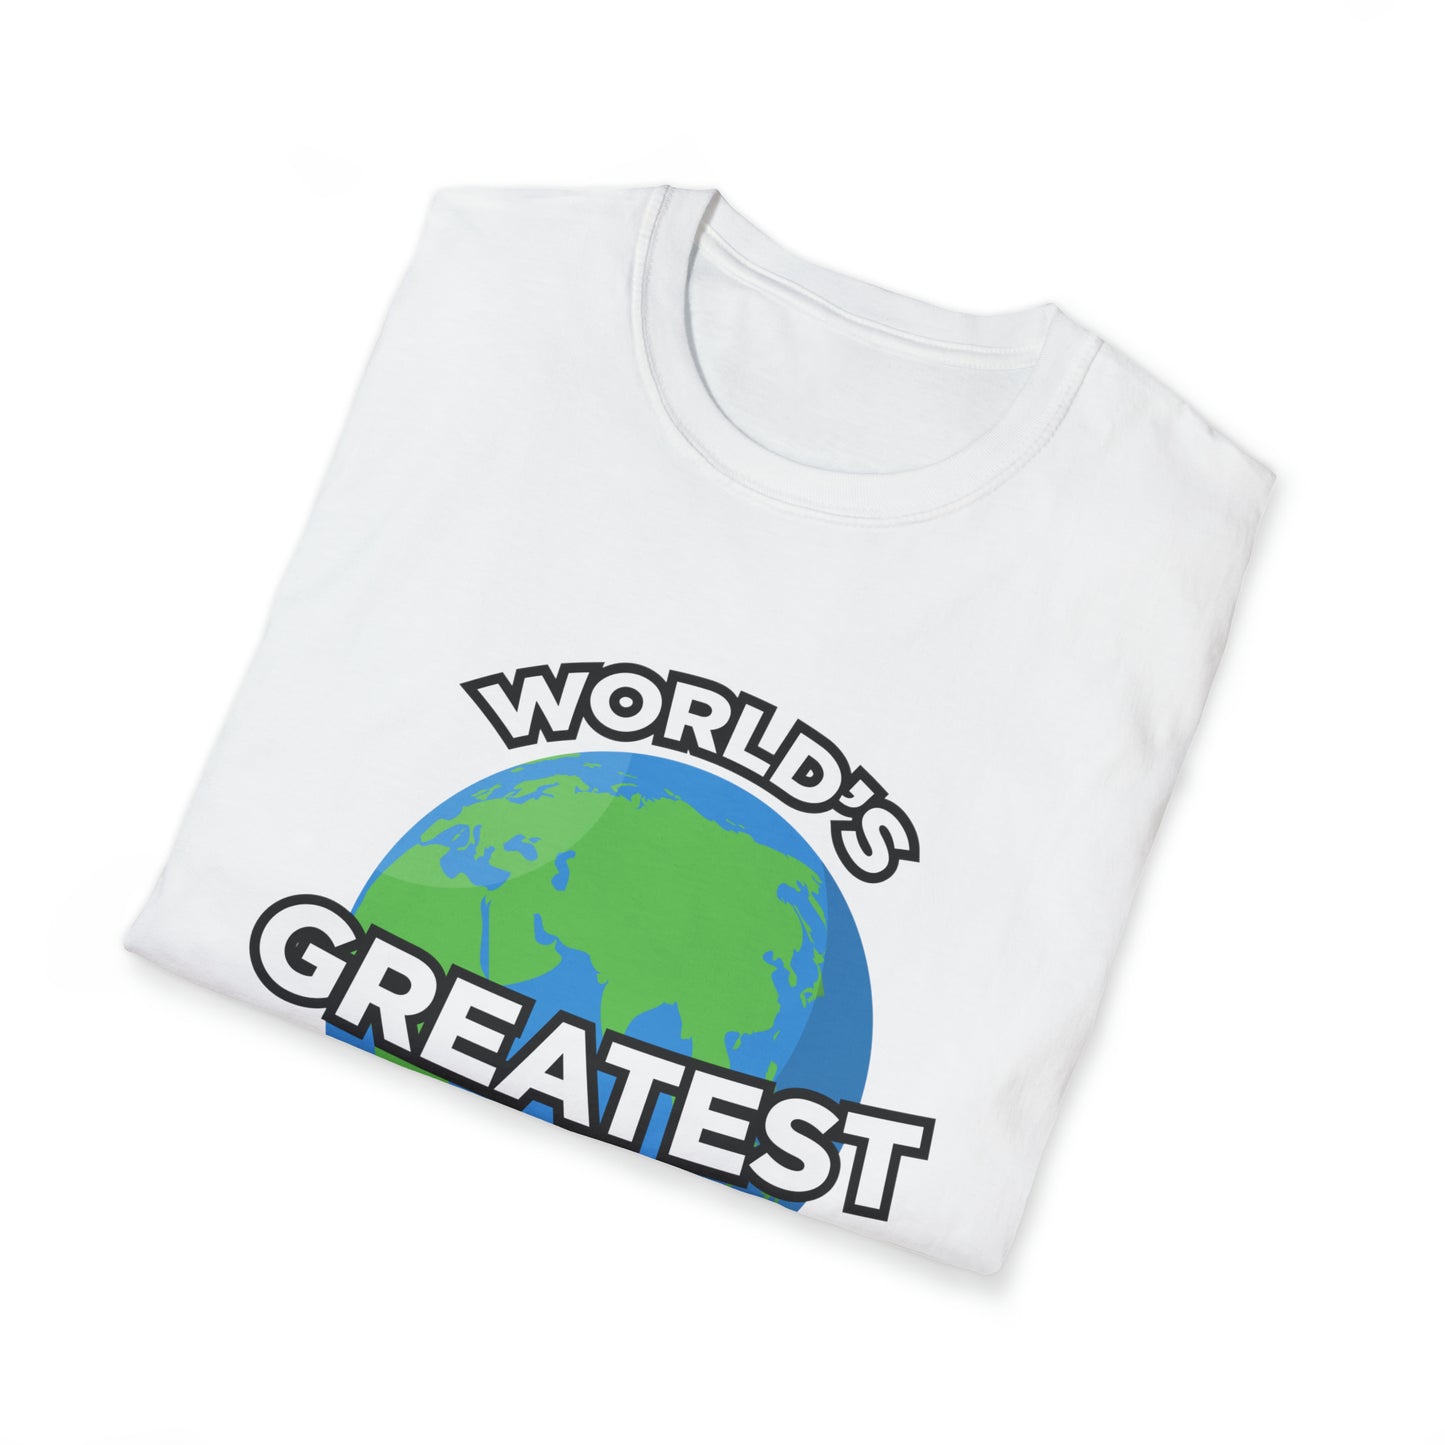 World's Greatest Dad - The T-Shirt That Says It All